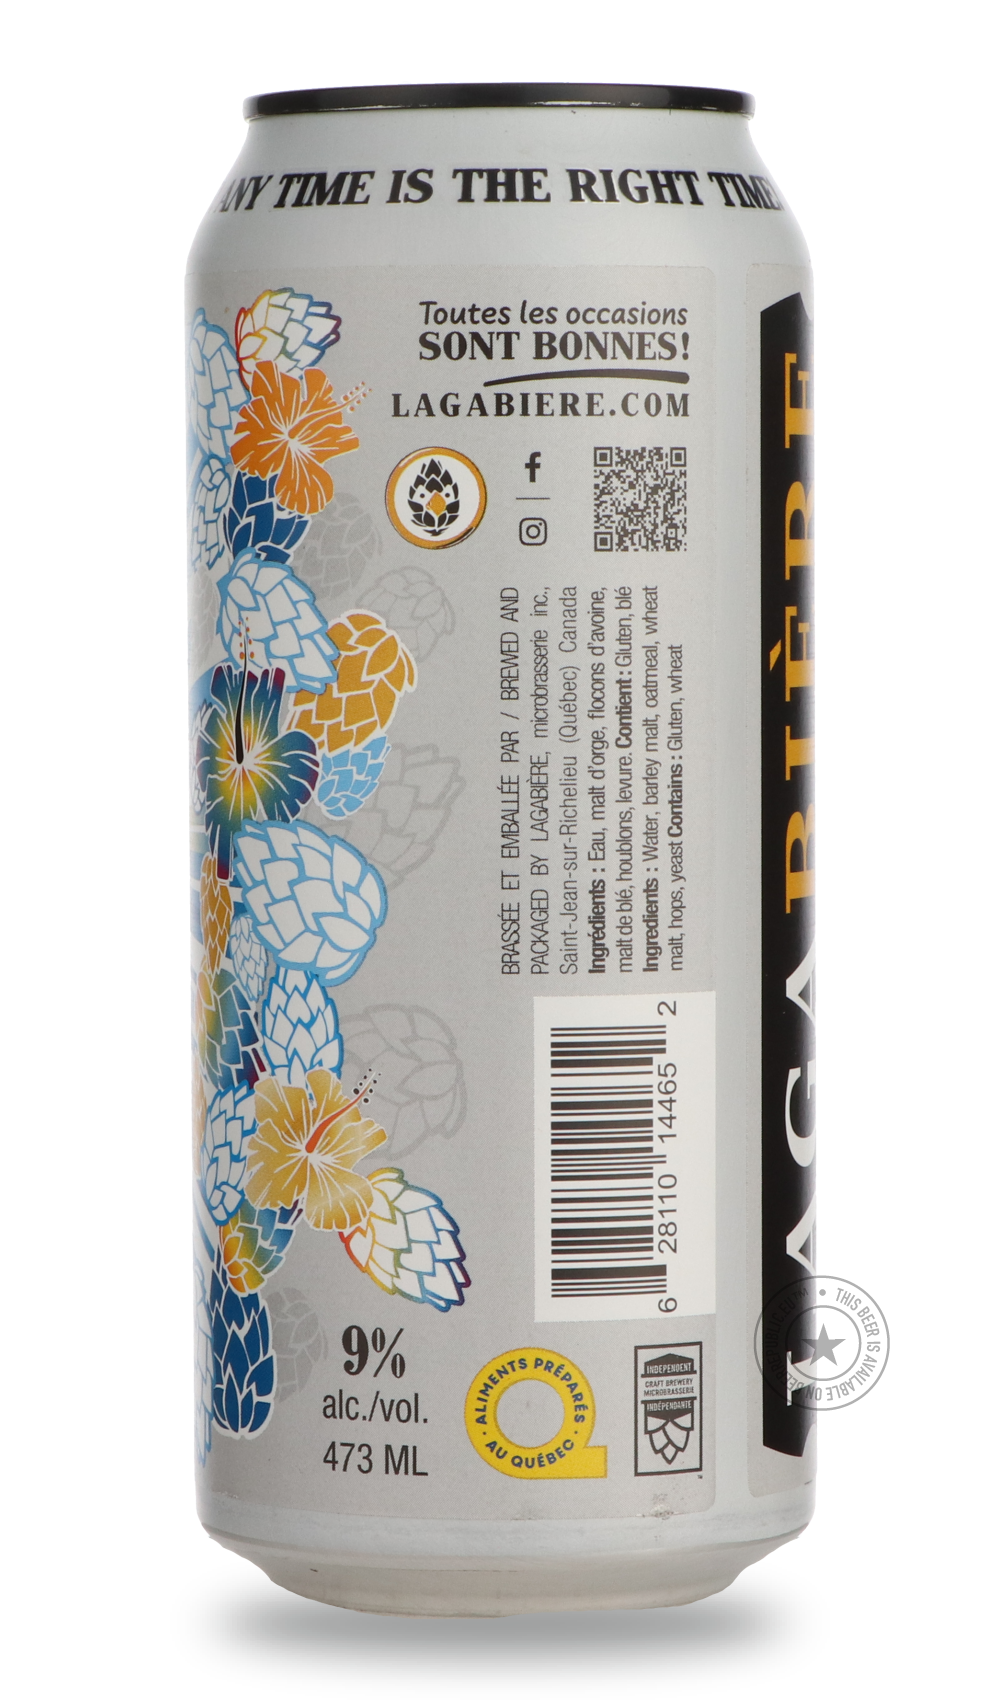 -Lagabière- Ukulele IPA : NEIPA DDH Citra & Simcoe-IPA- Only @ Beer Republic - The best online beer store for American & Canadian craft beer - Buy beer online from the USA and Canada - Bier online kopen - Amerikaans bier kopen - Craft beer store - Craft beer kopen - Amerikanisch bier kaufen - Bier online kaufen - Acheter biere online - IPA - Stout - Porter - New England IPA - Hazy IPA - Imperial Stout - Barrel Aged - Barrel Aged Imperial Stout - Brown - Dark beer - Blond - Blonde - Pilsner - Lager - Wheat -